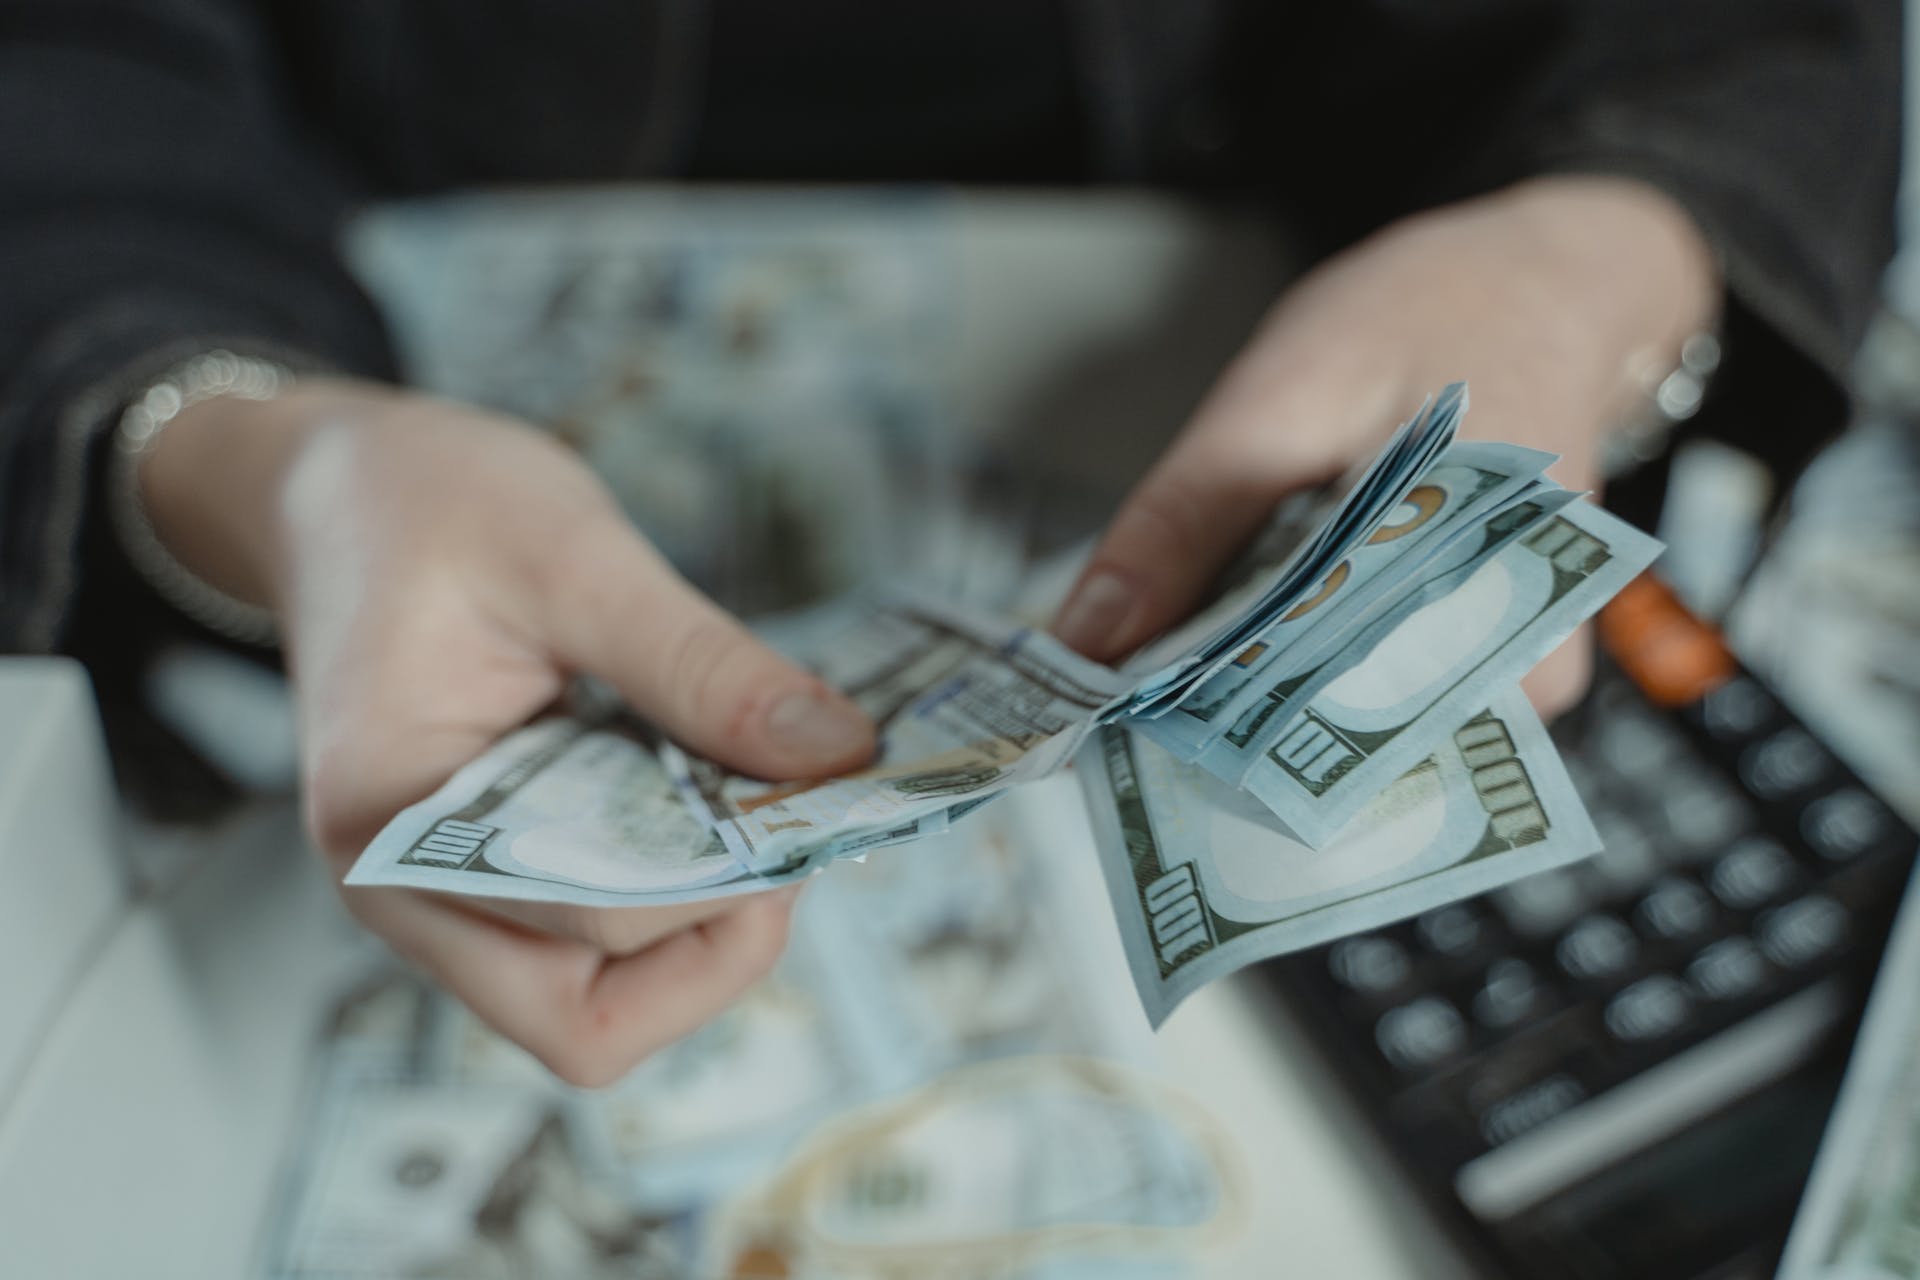 A person counting money | Source: Pexels